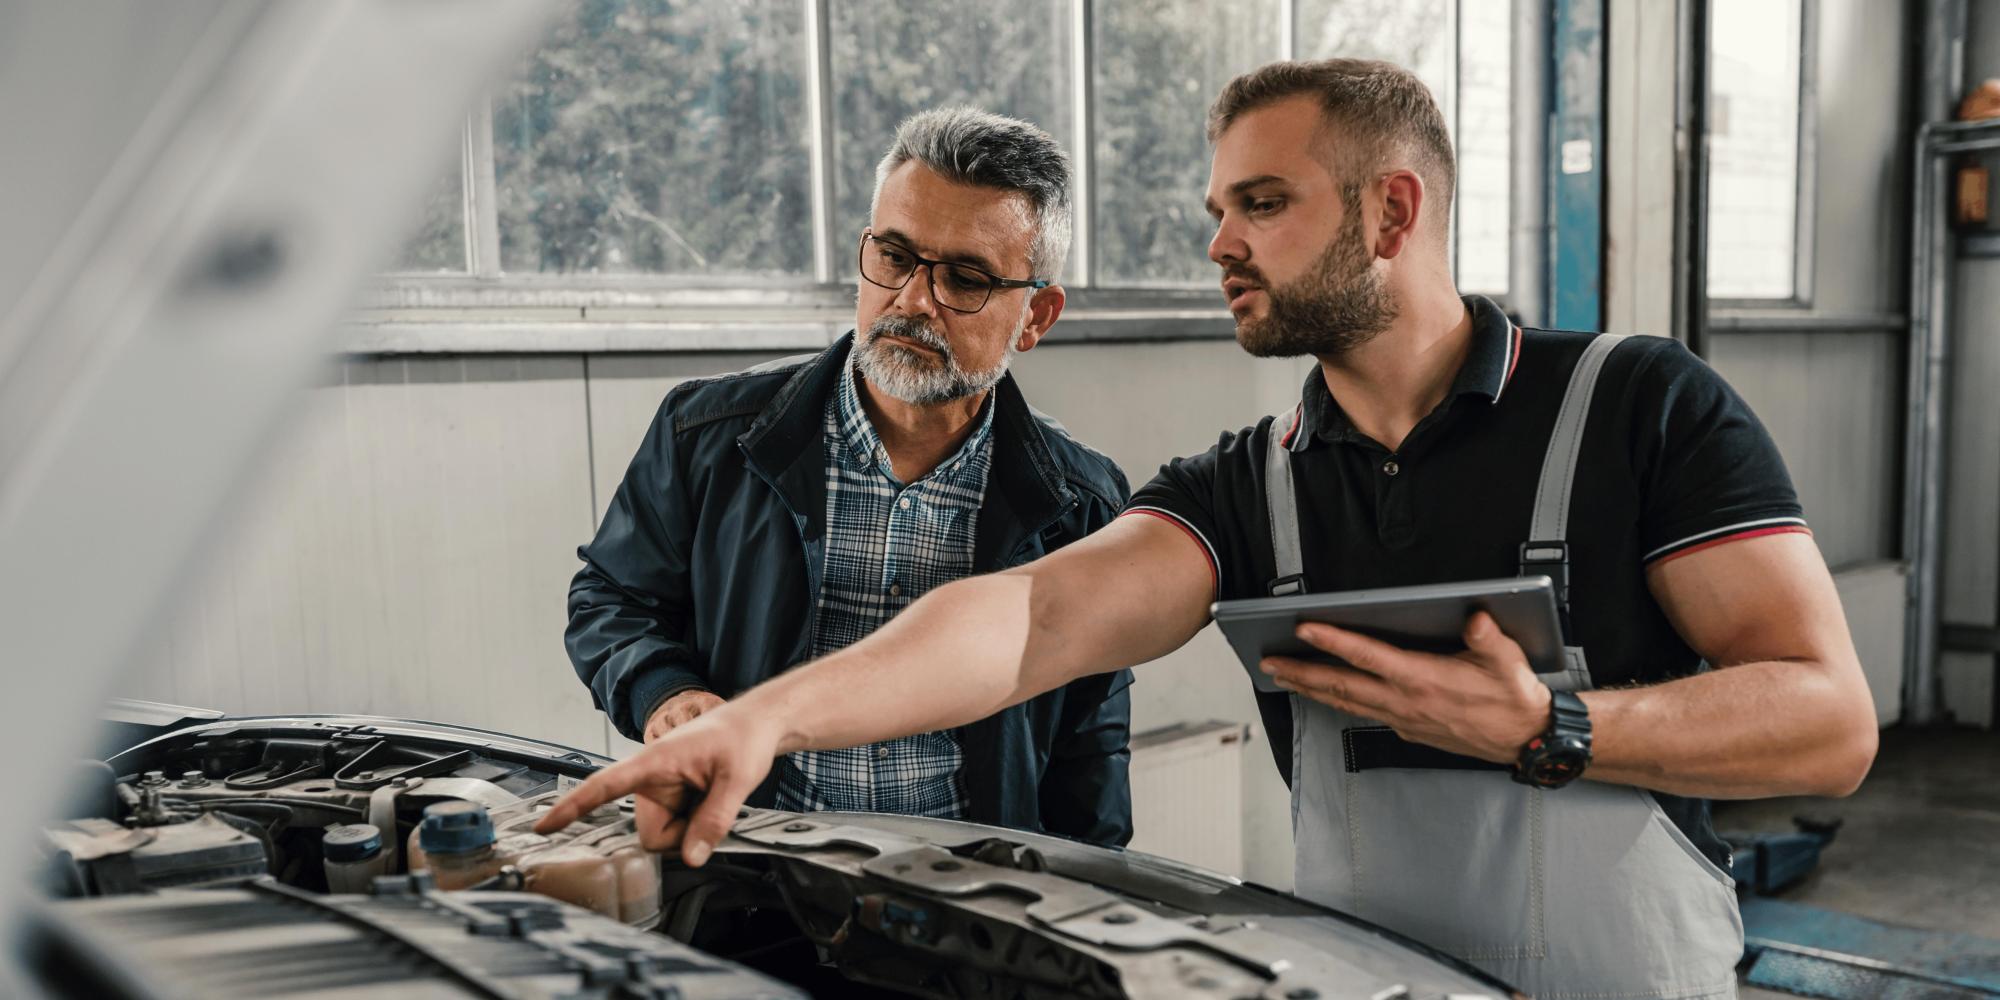 7 Common Reasons to Service Your Car With A Professional